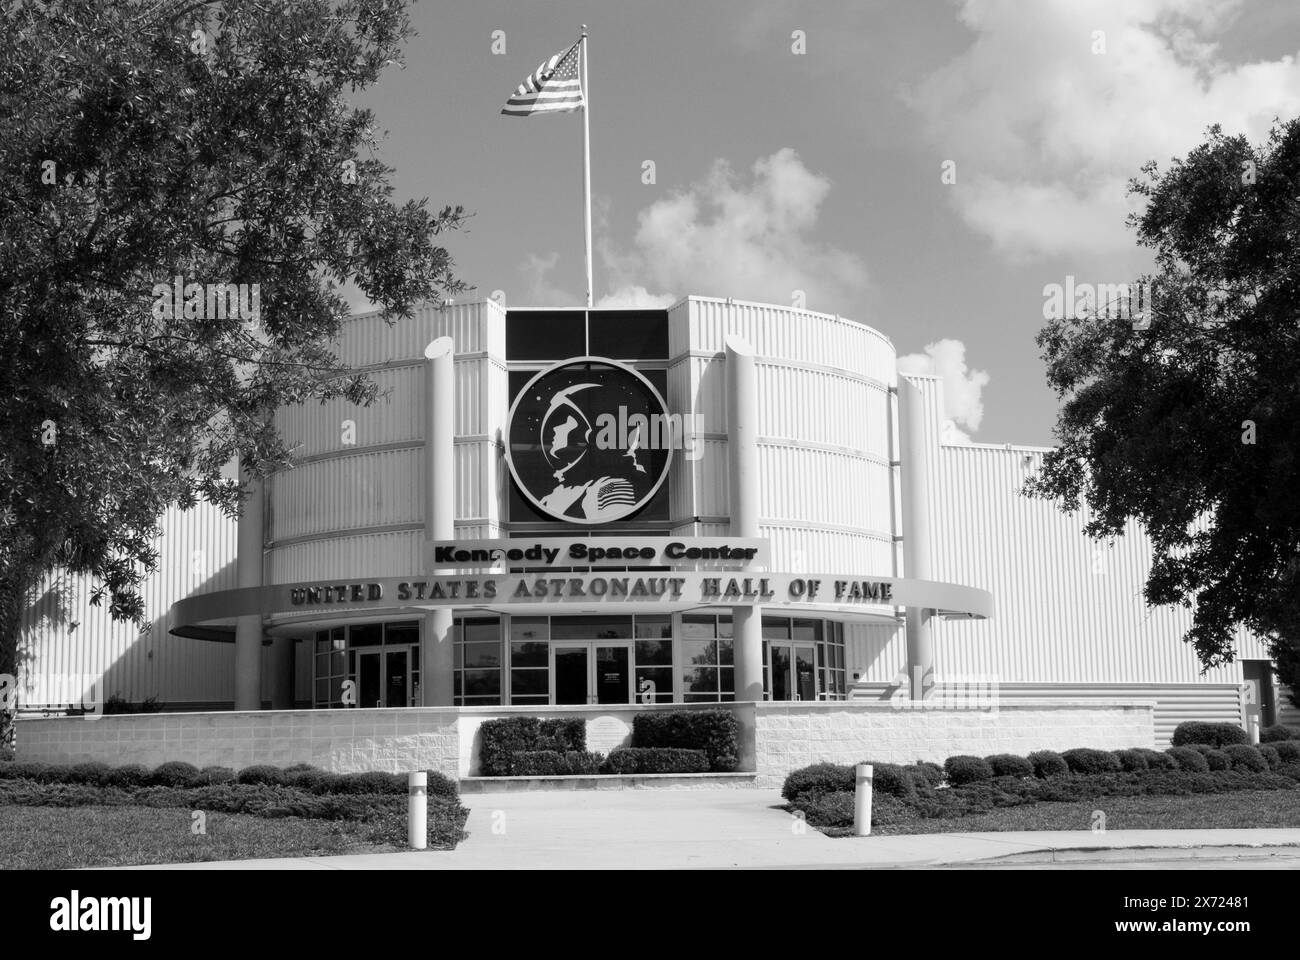 Photo stock de United States Astronaut Hall of Fame au John F. Kennedy Space Center Visitor Complex Titusville FL USA Banque D'Images